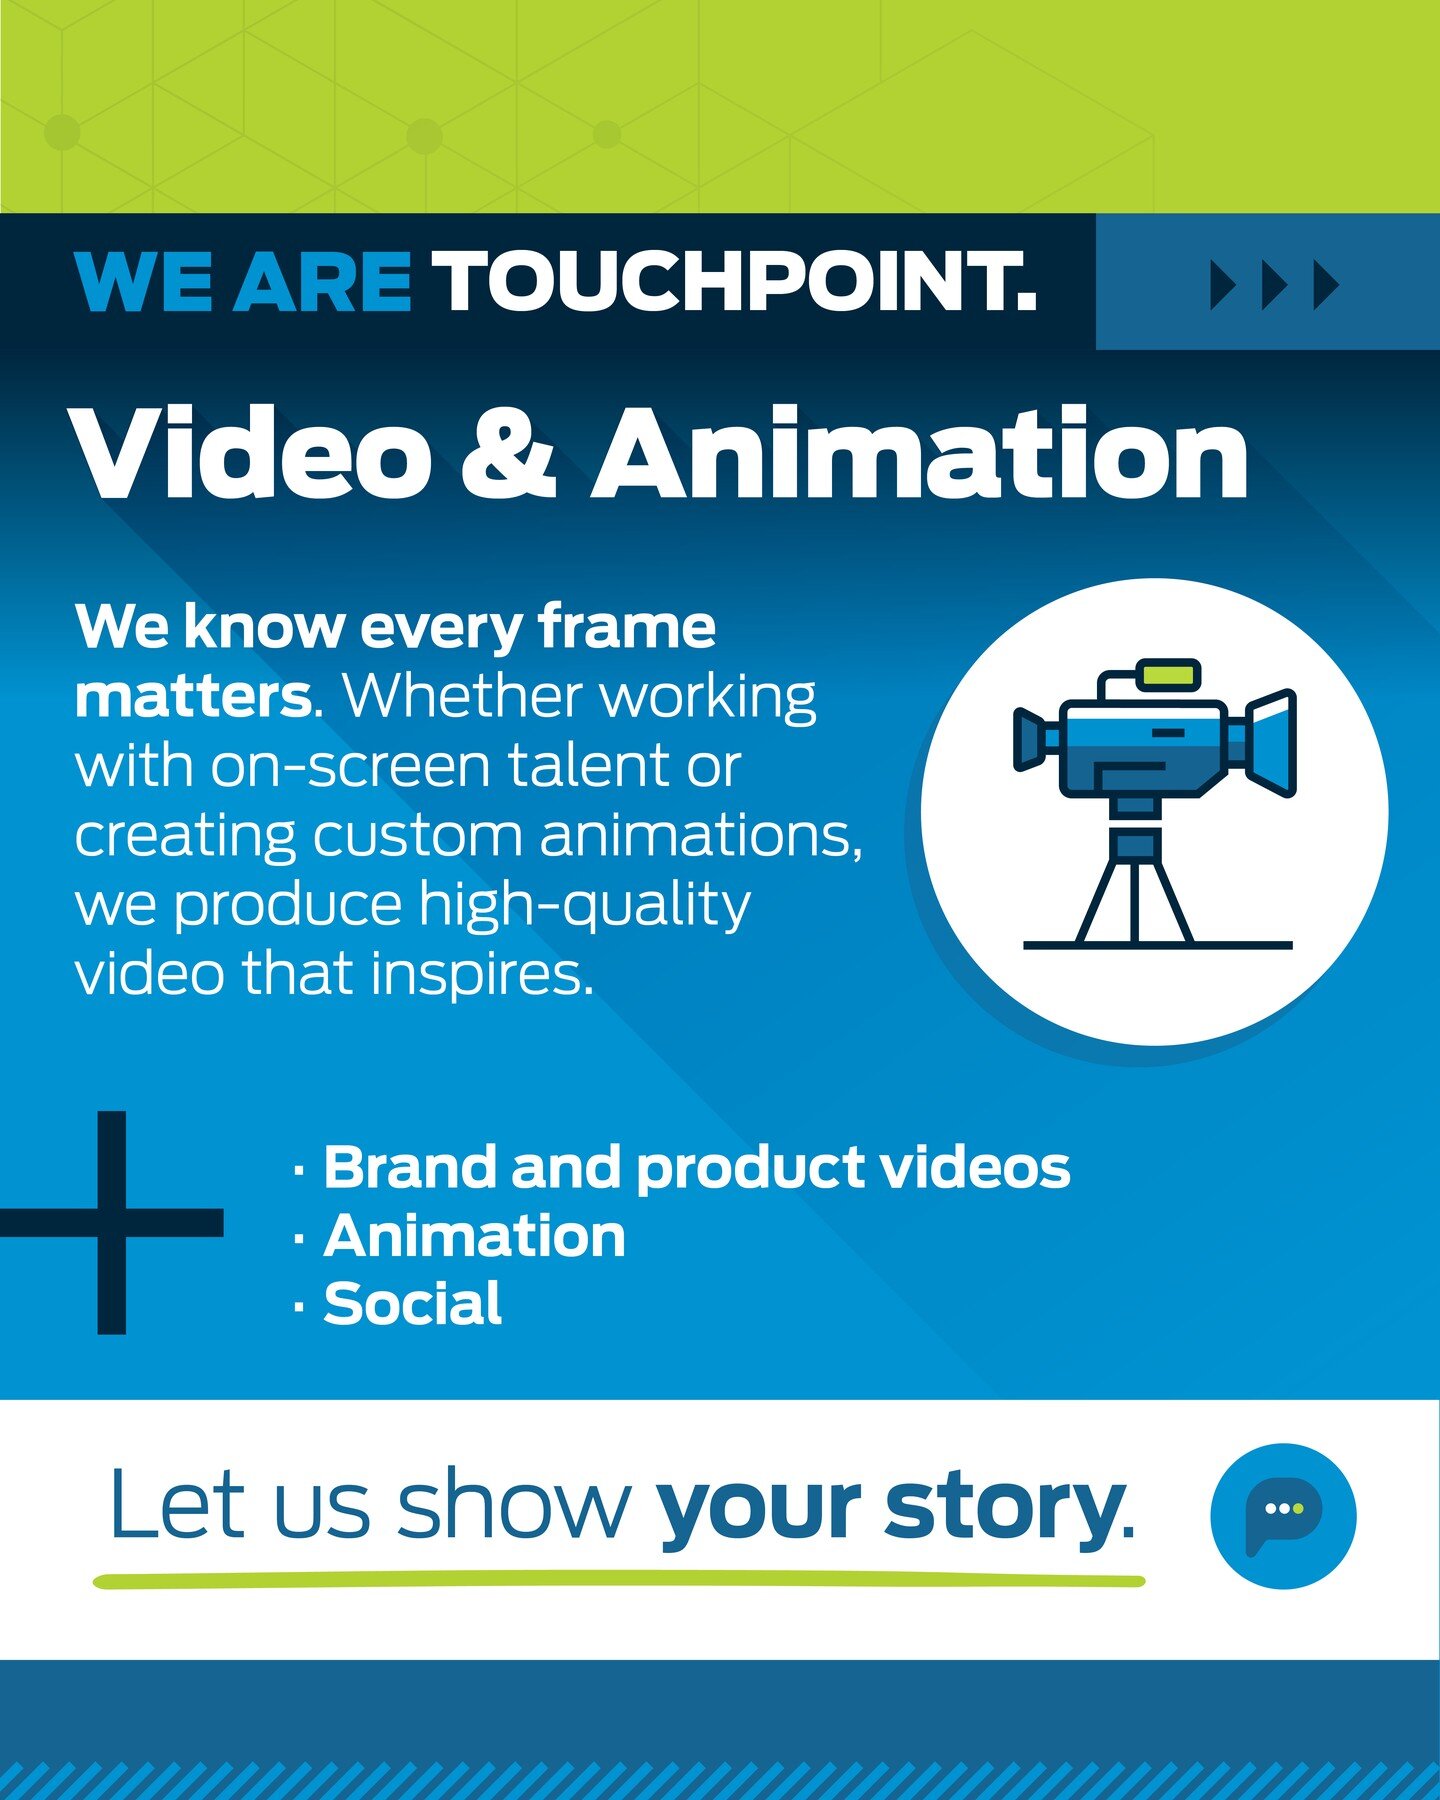 To learn more about our video capabilities&mdash;from the scripting process to the editing room&mdash;visit our website or email laura@touchpointmedia.com to get in touch.